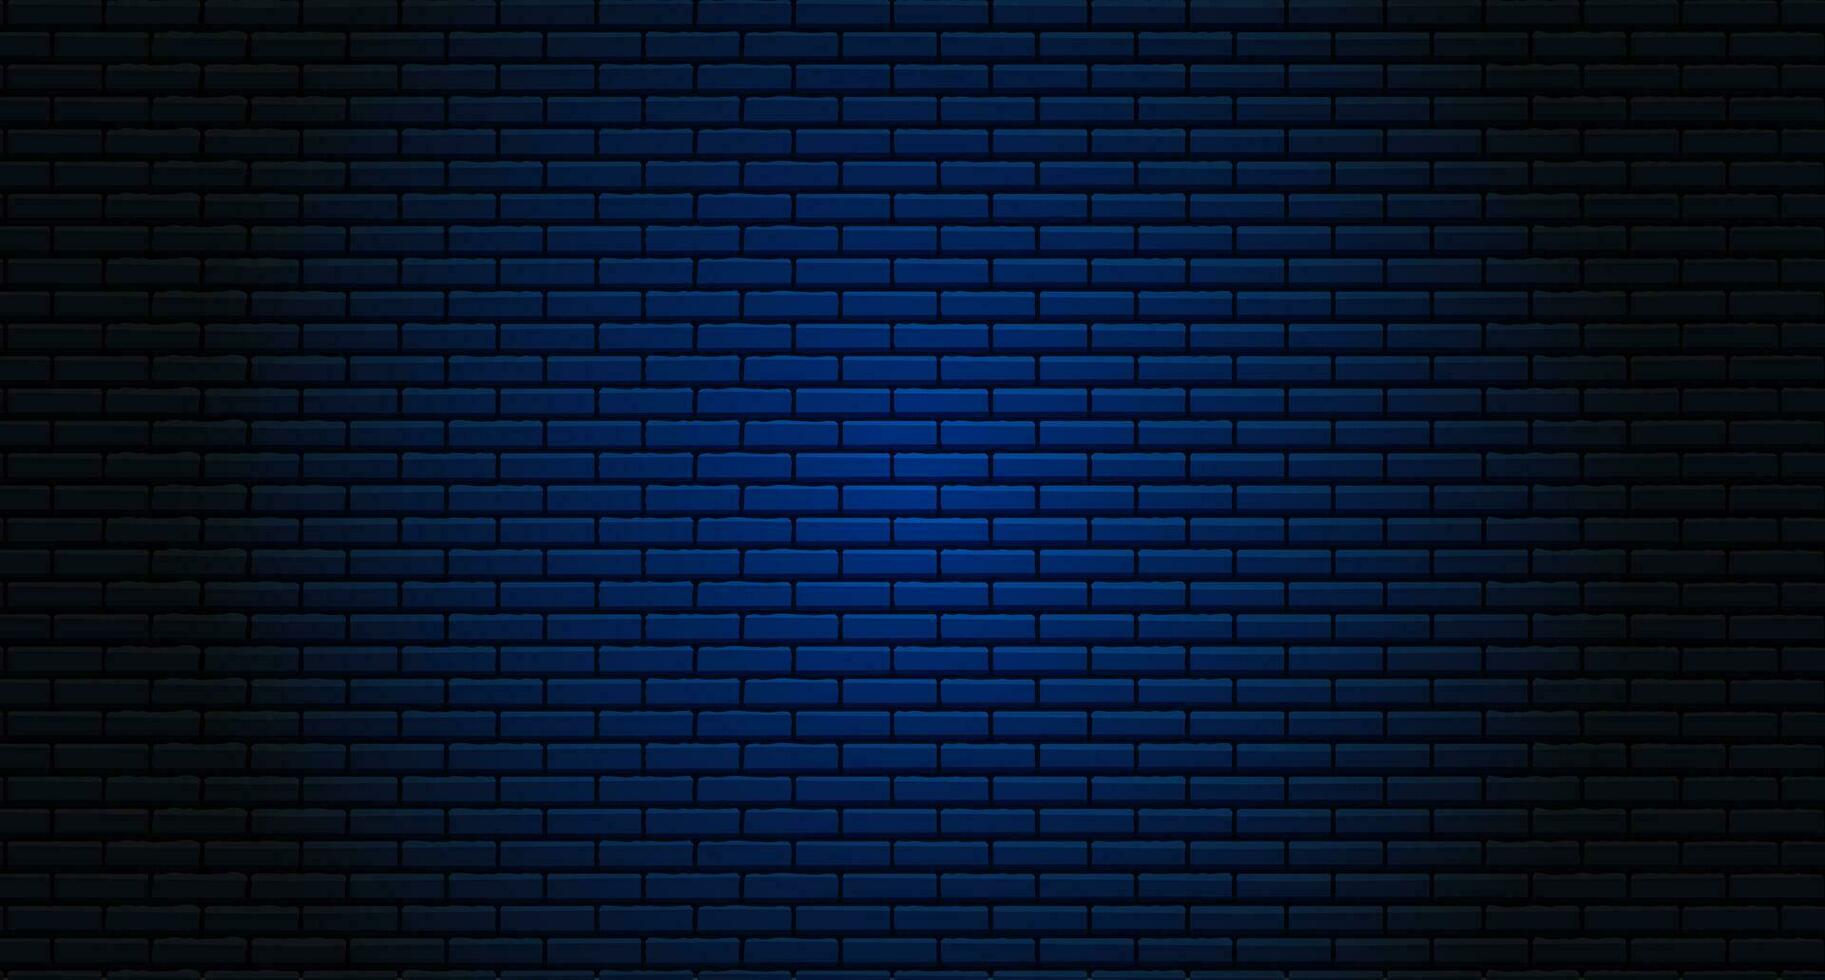 Nightly brick wall. background for neon lights. Concept dark brick wall text place, brickwork message background area. Vector illustration.